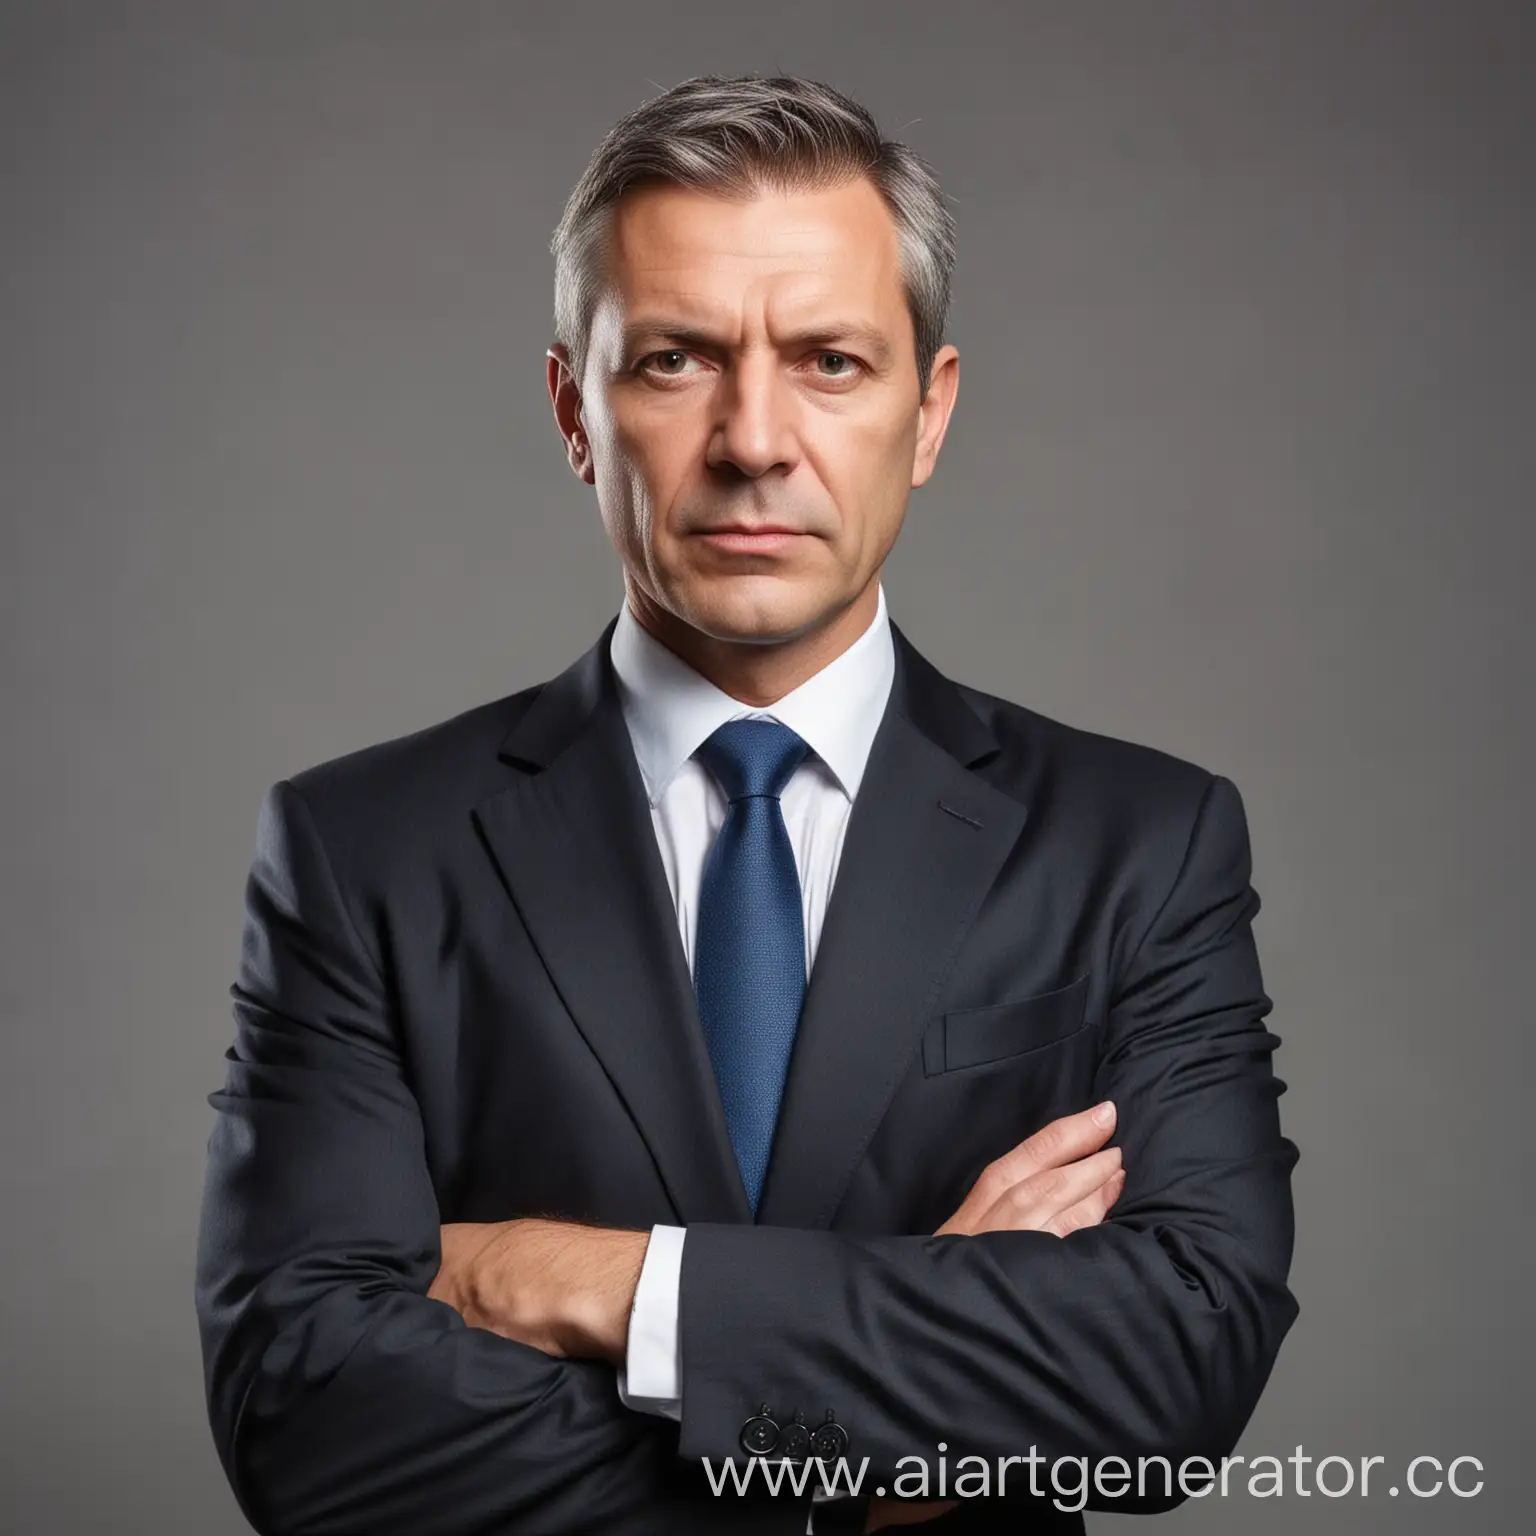 Middleaged-Businessman-in-Formal-Suit-Poses-Frontally